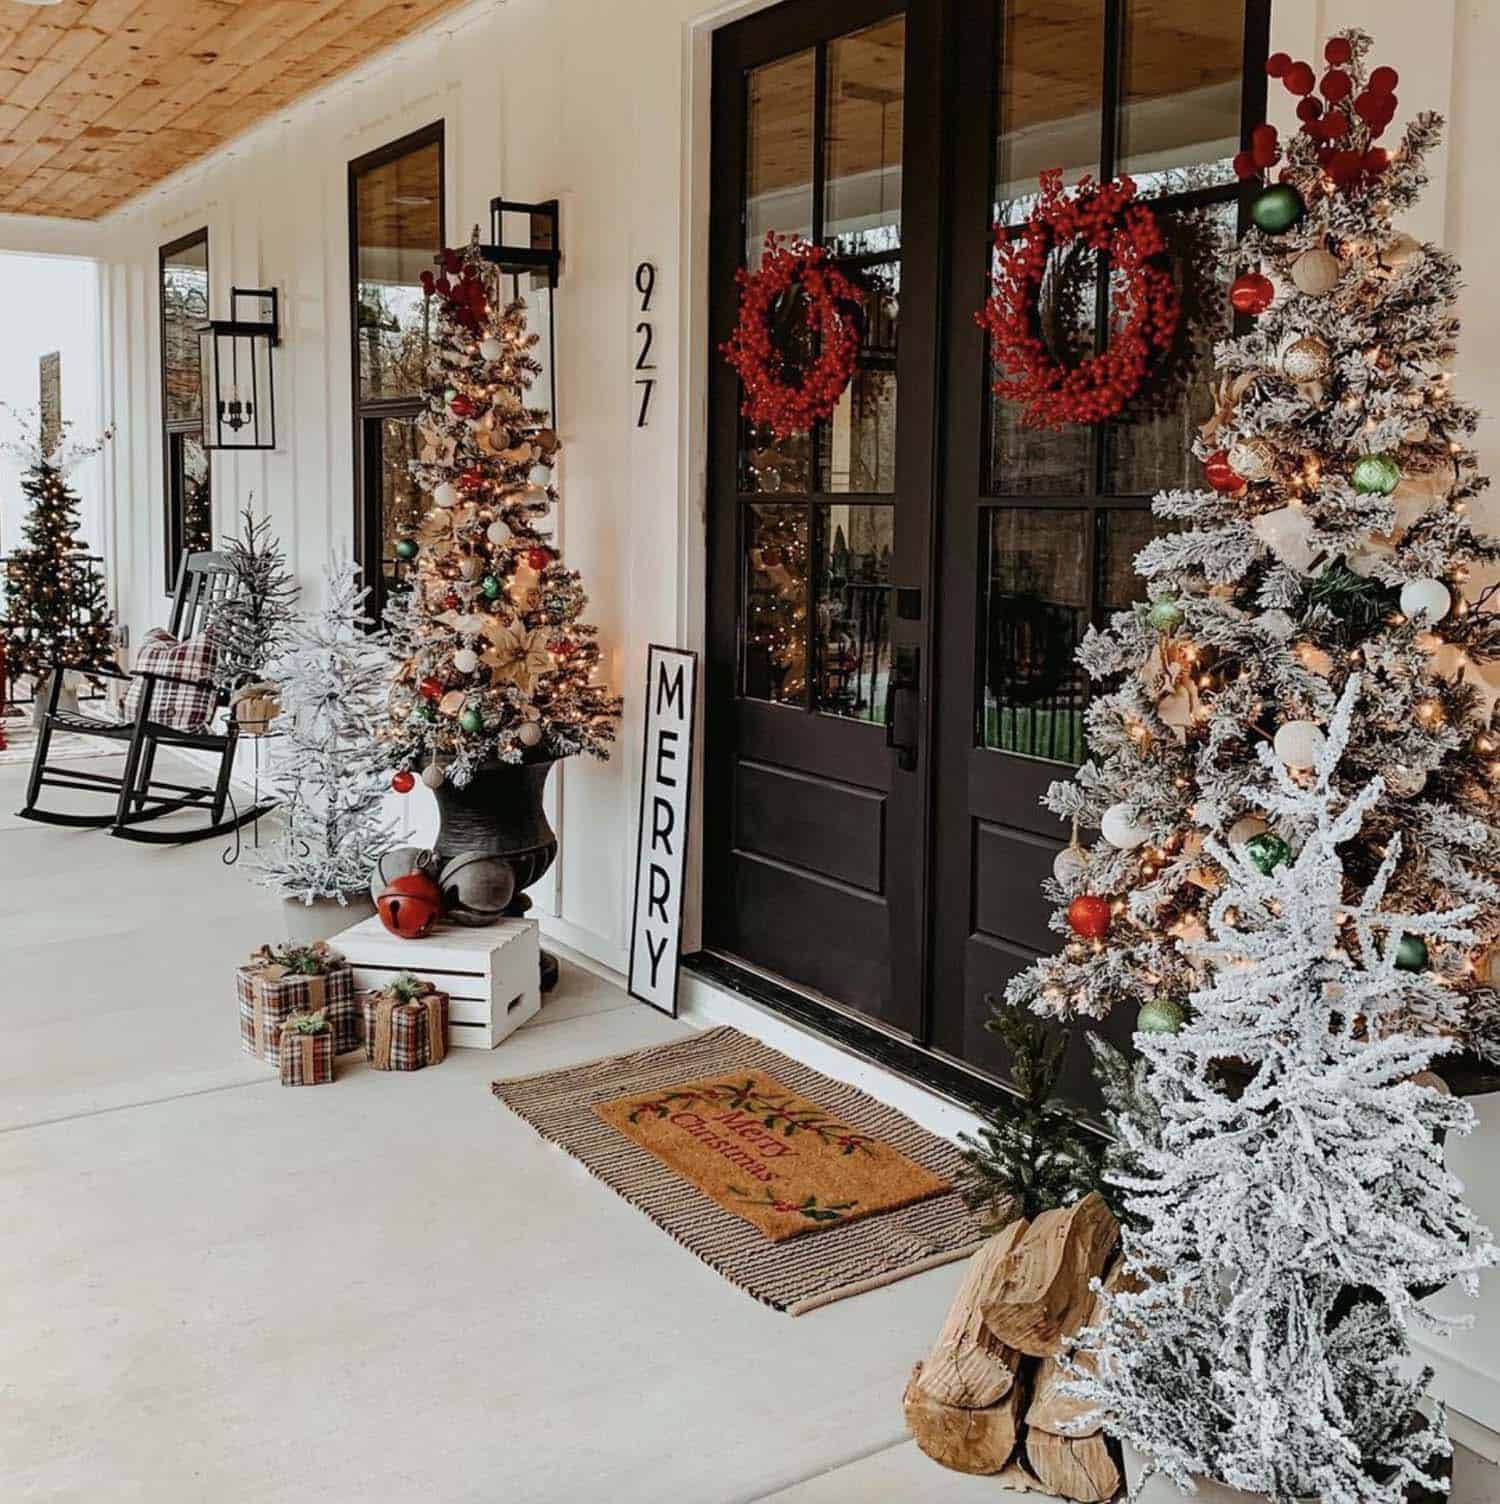 farmhouse style Christmas porch with trees, wreaths, plaid presents and bells